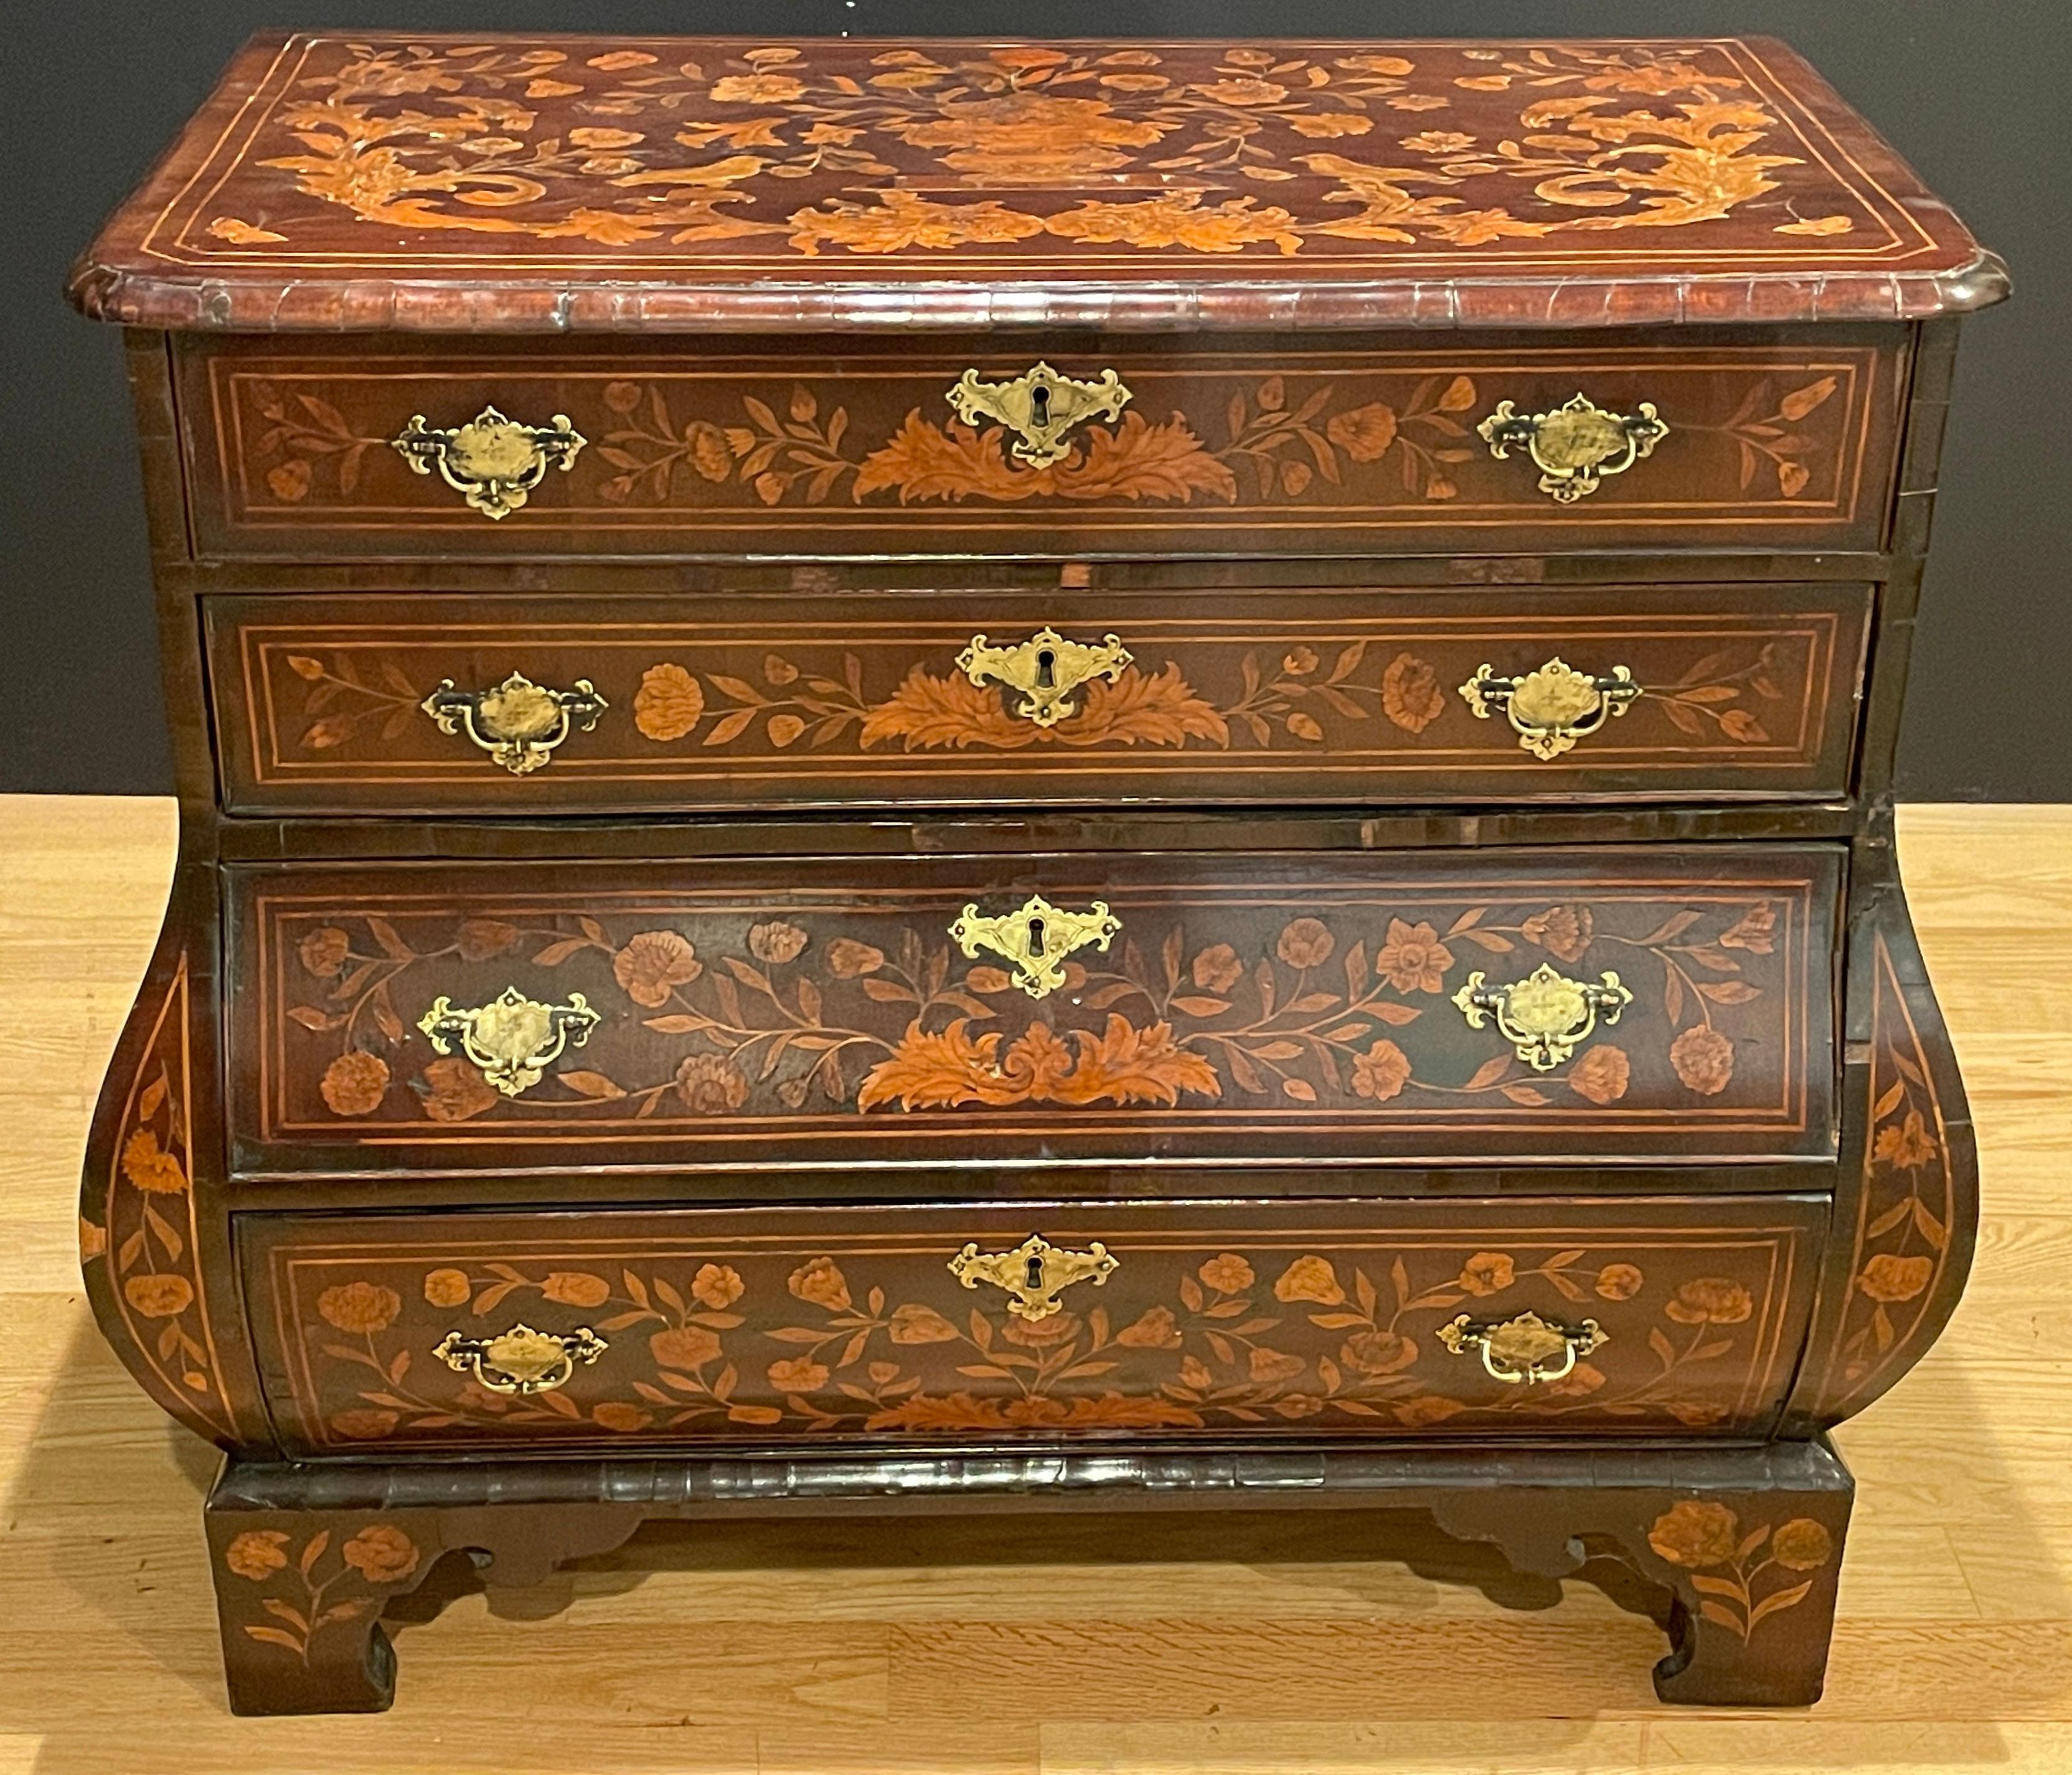 Beautiful and fine quality 18th century Dutch marquetry chest of draws. Inlay includes birds, butterflies, urns and florals. Original brasses.